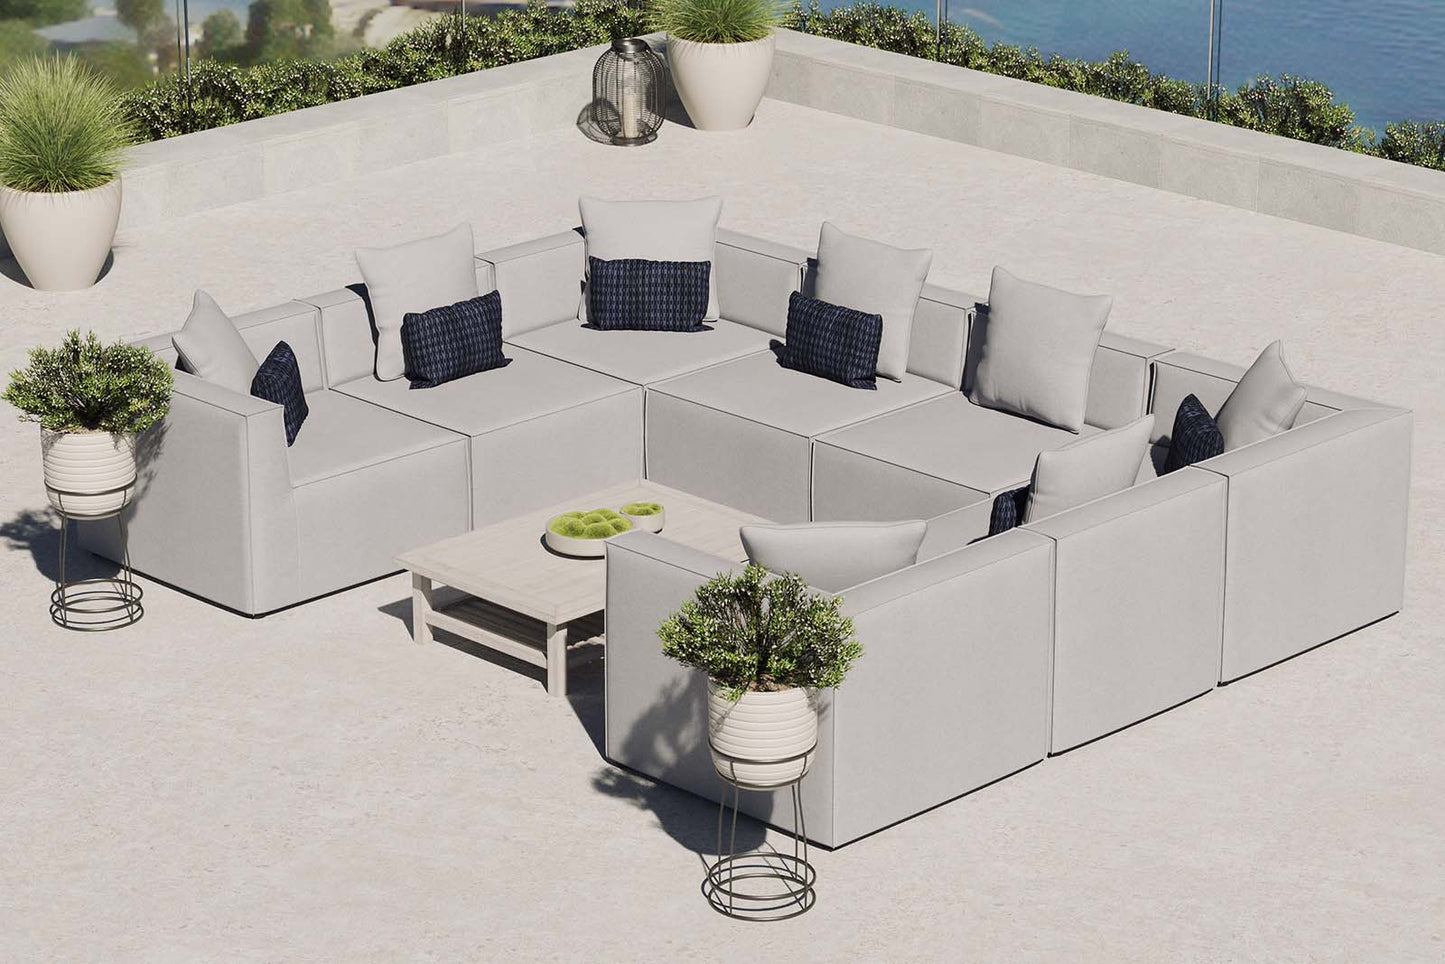 Saybrook Outdoor Patio Upholstered 8-Piece Sectional Sofa Gray EEI-4388-GRY